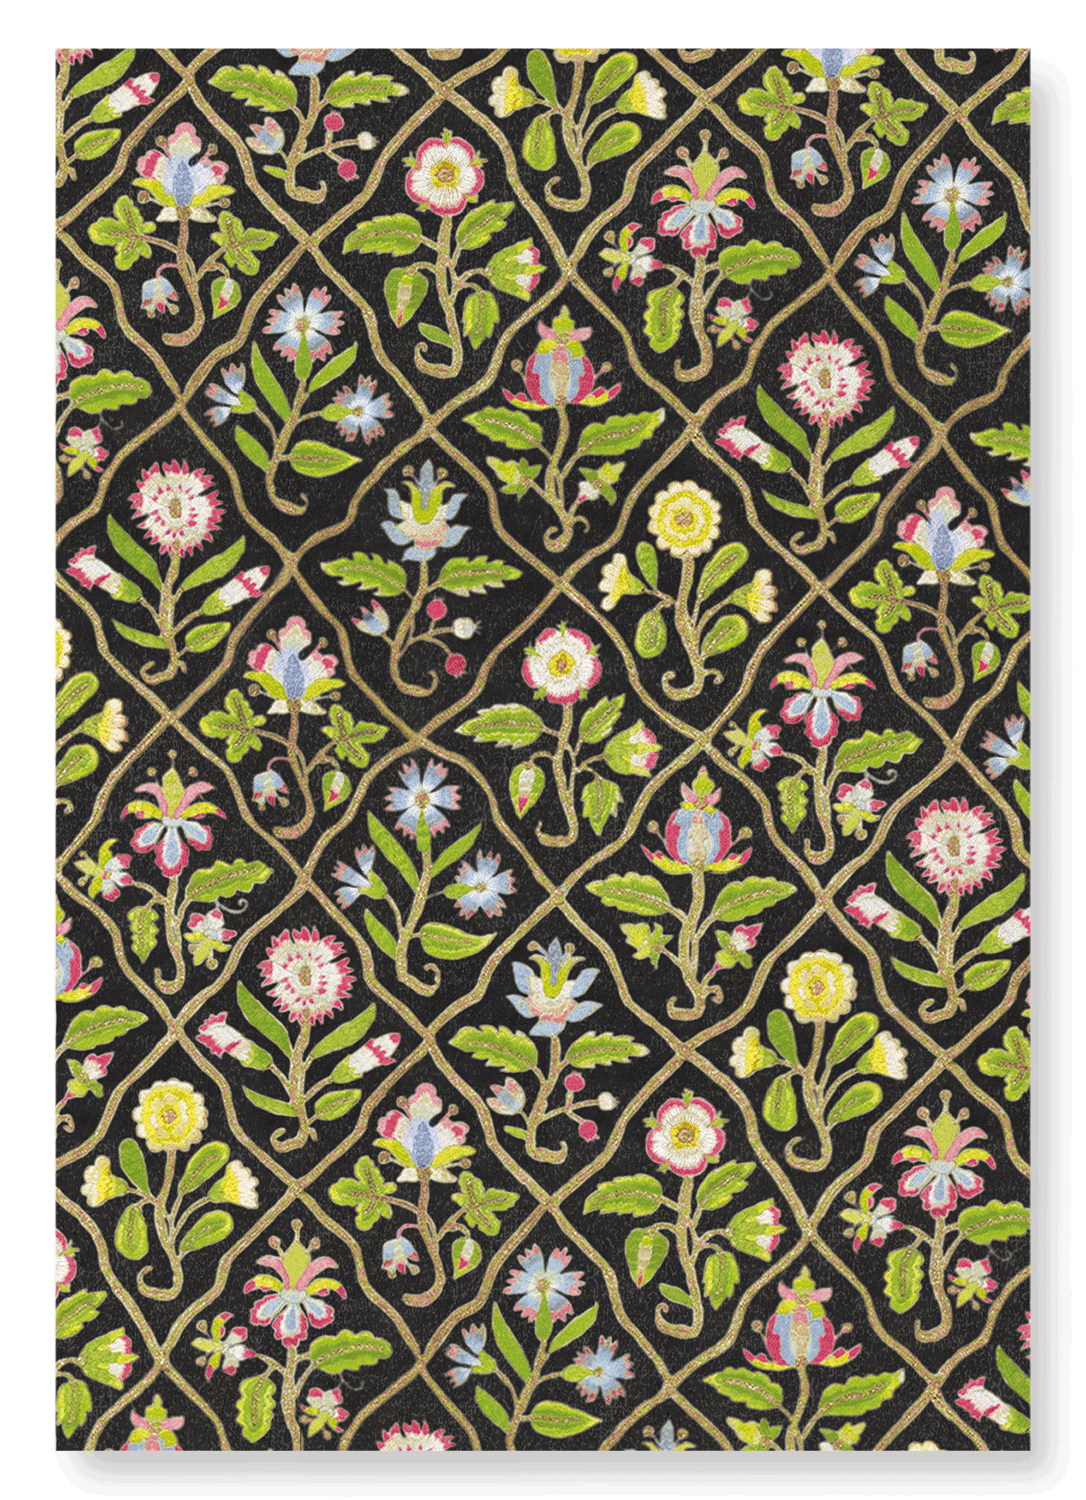 FLORAL EMBROIDERY ON BLACK (17TH C.)